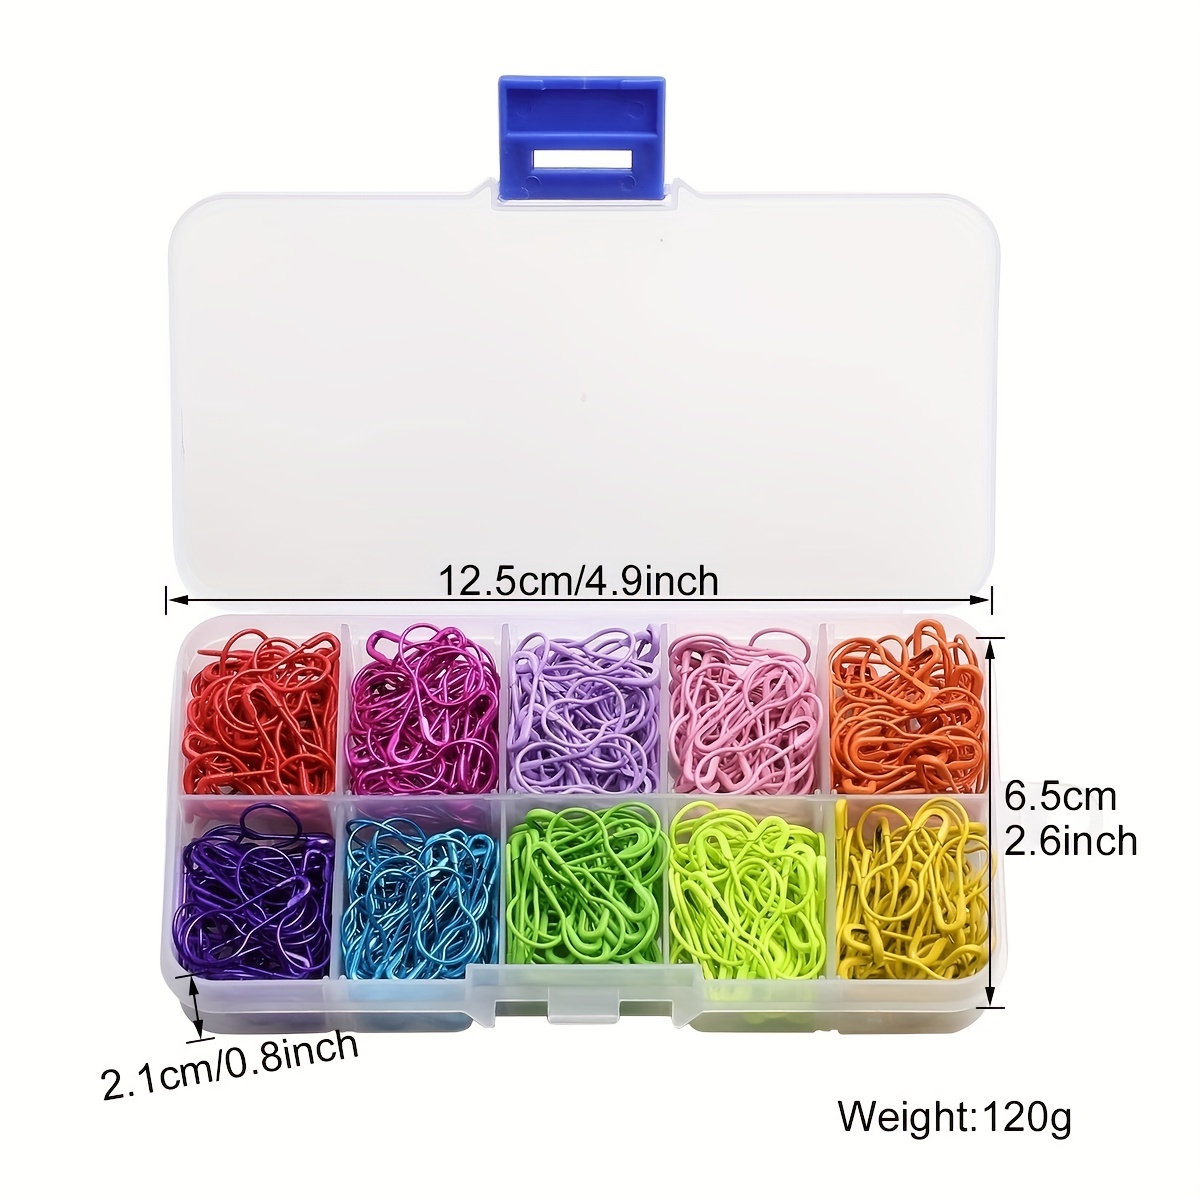 100Pcs Safety Pins Colored Safety Pins Metal Safety Pins with Storage Box Small  Safety Pins for Clothes DIY Crafts Sewing Home